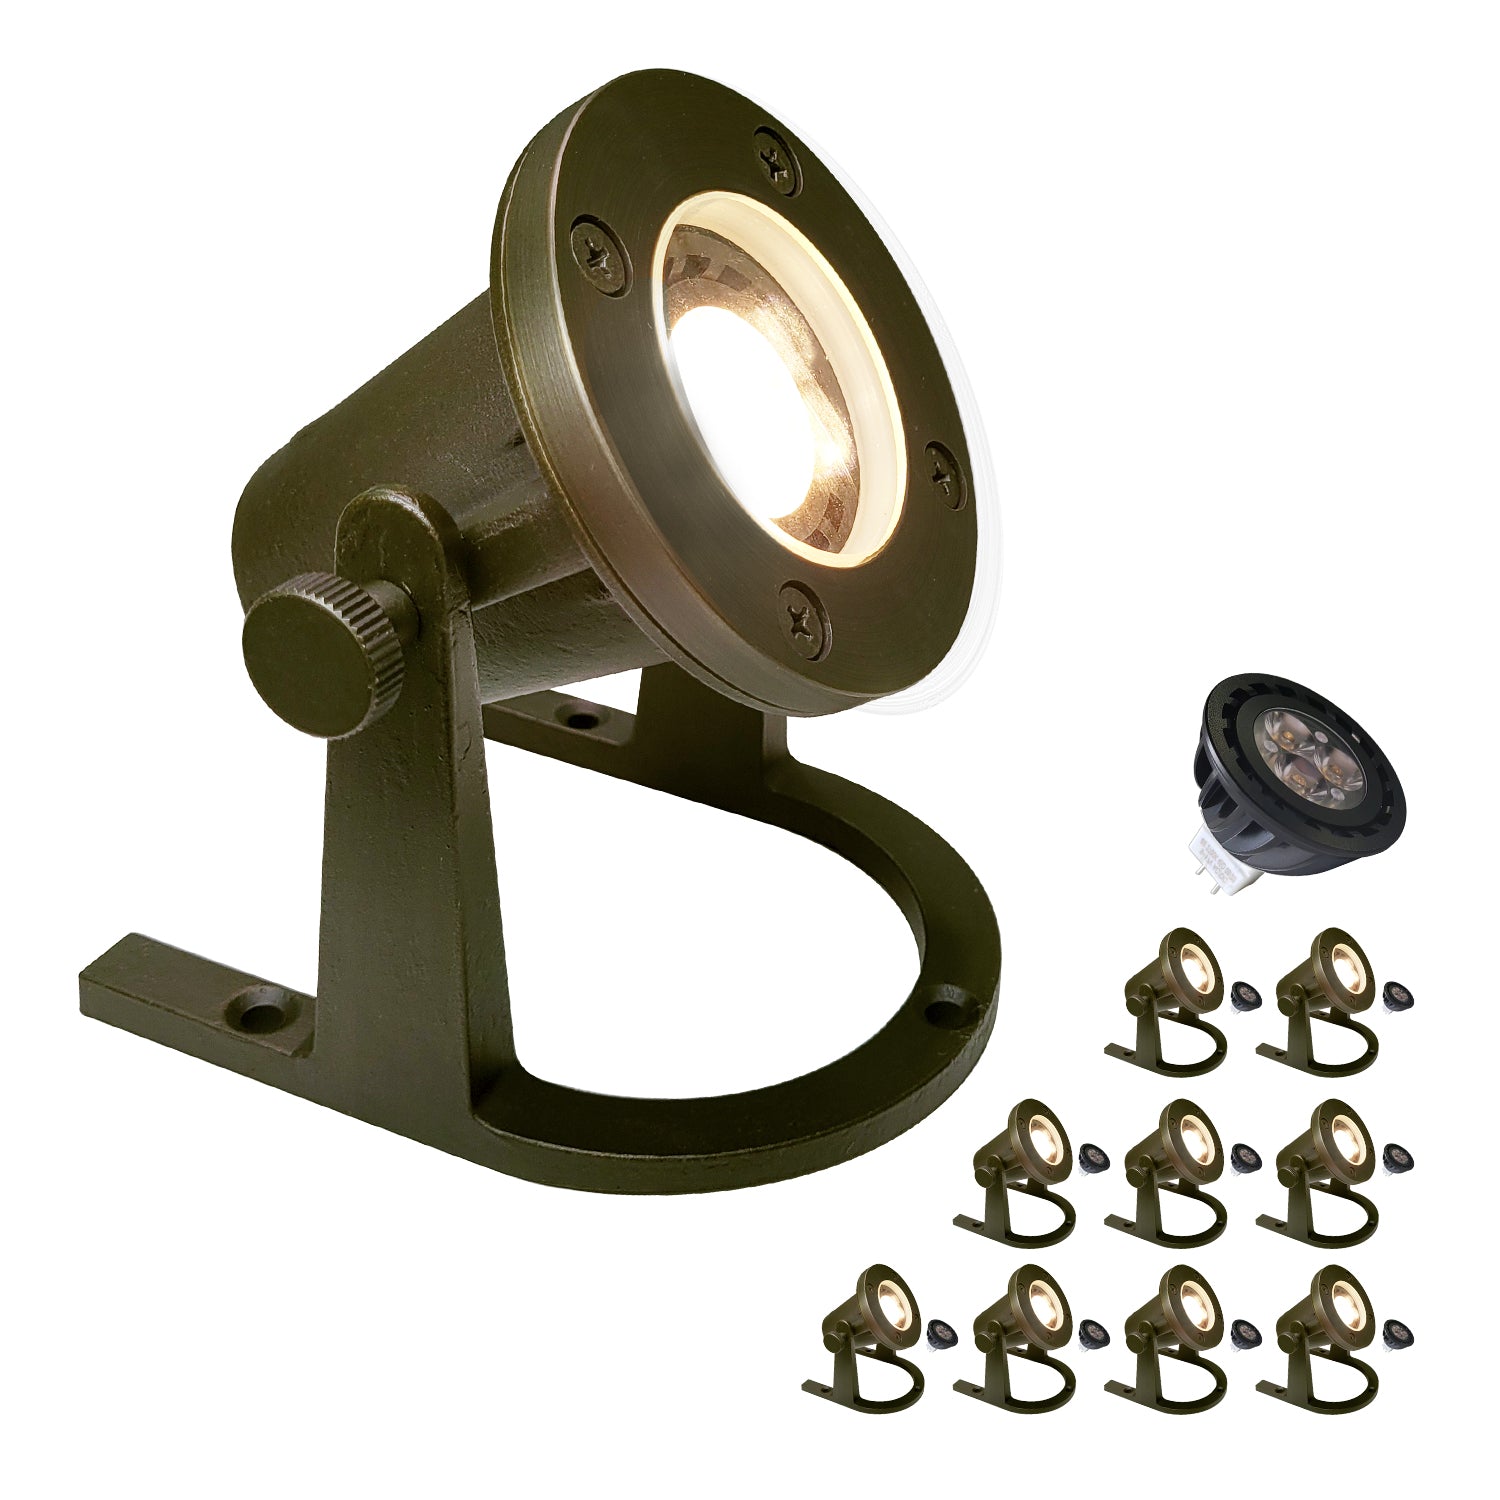 Brass underwater low voltage landscape light for pools and fountains COU1201B with adjustable mount and accessories.